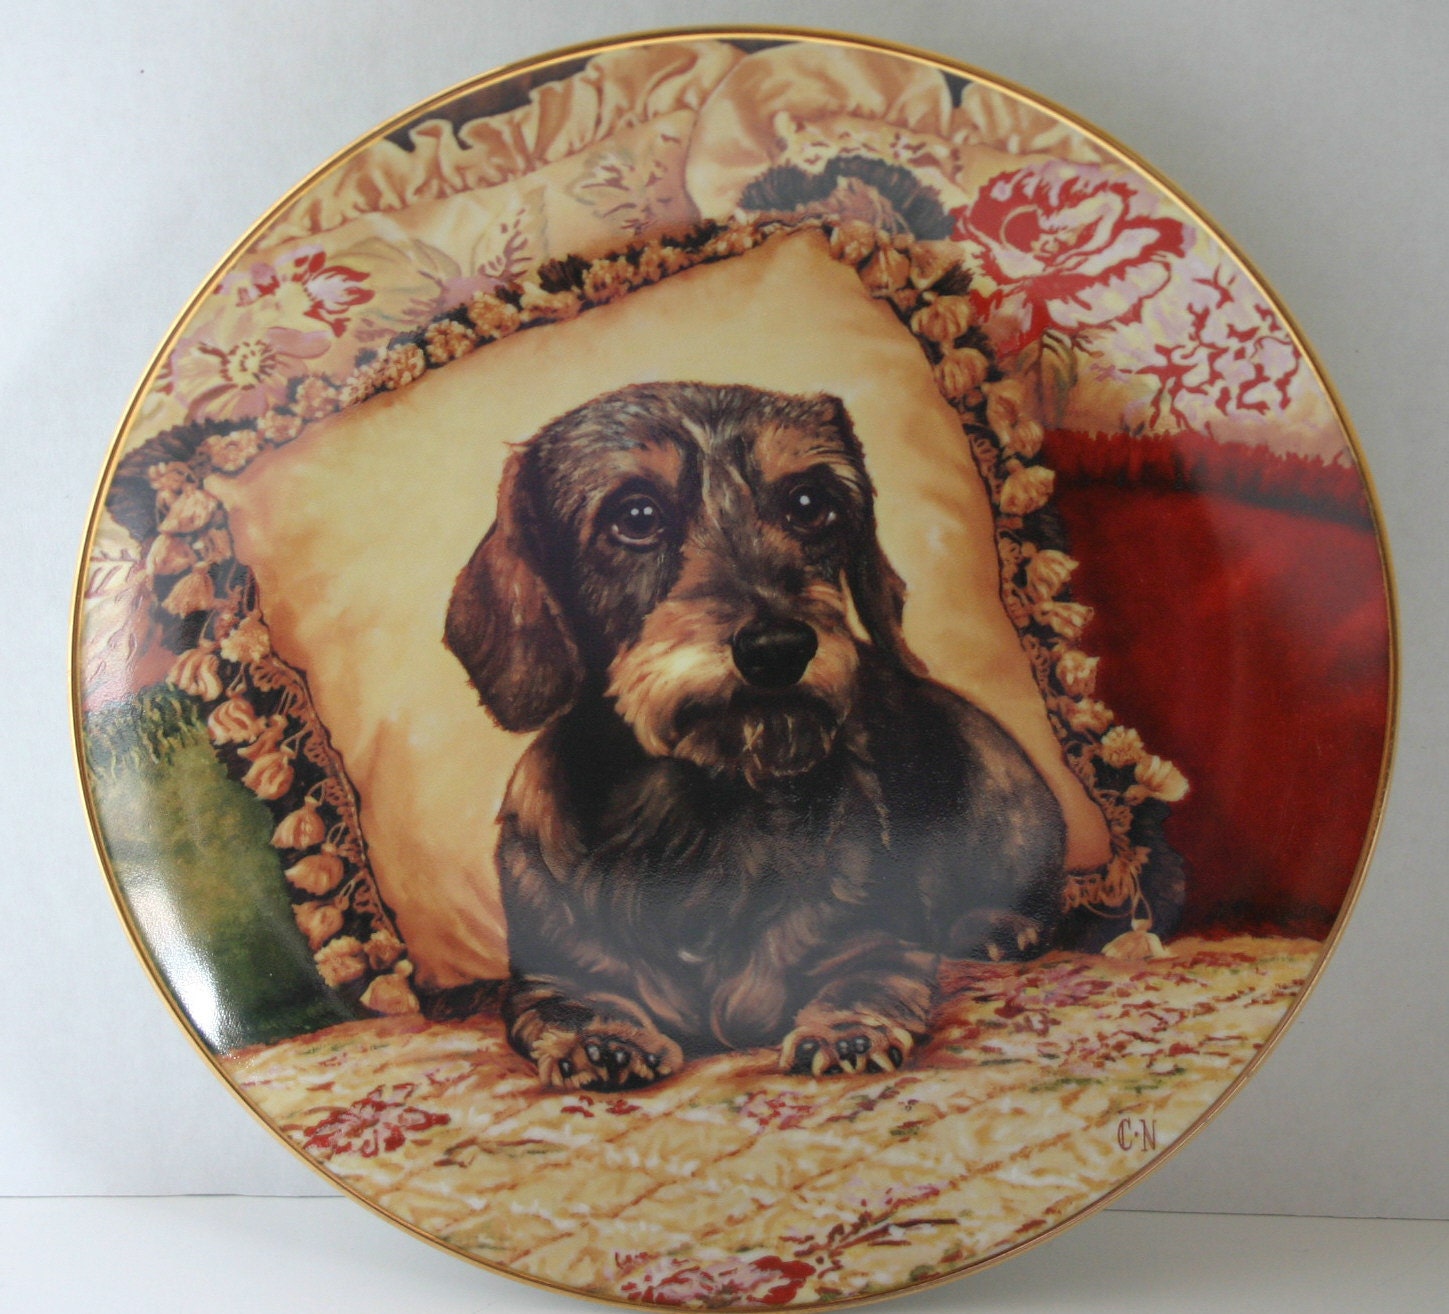 Sweet Dreams Danbury Mint Dachshunds Decorator Plate by Christopher Nick